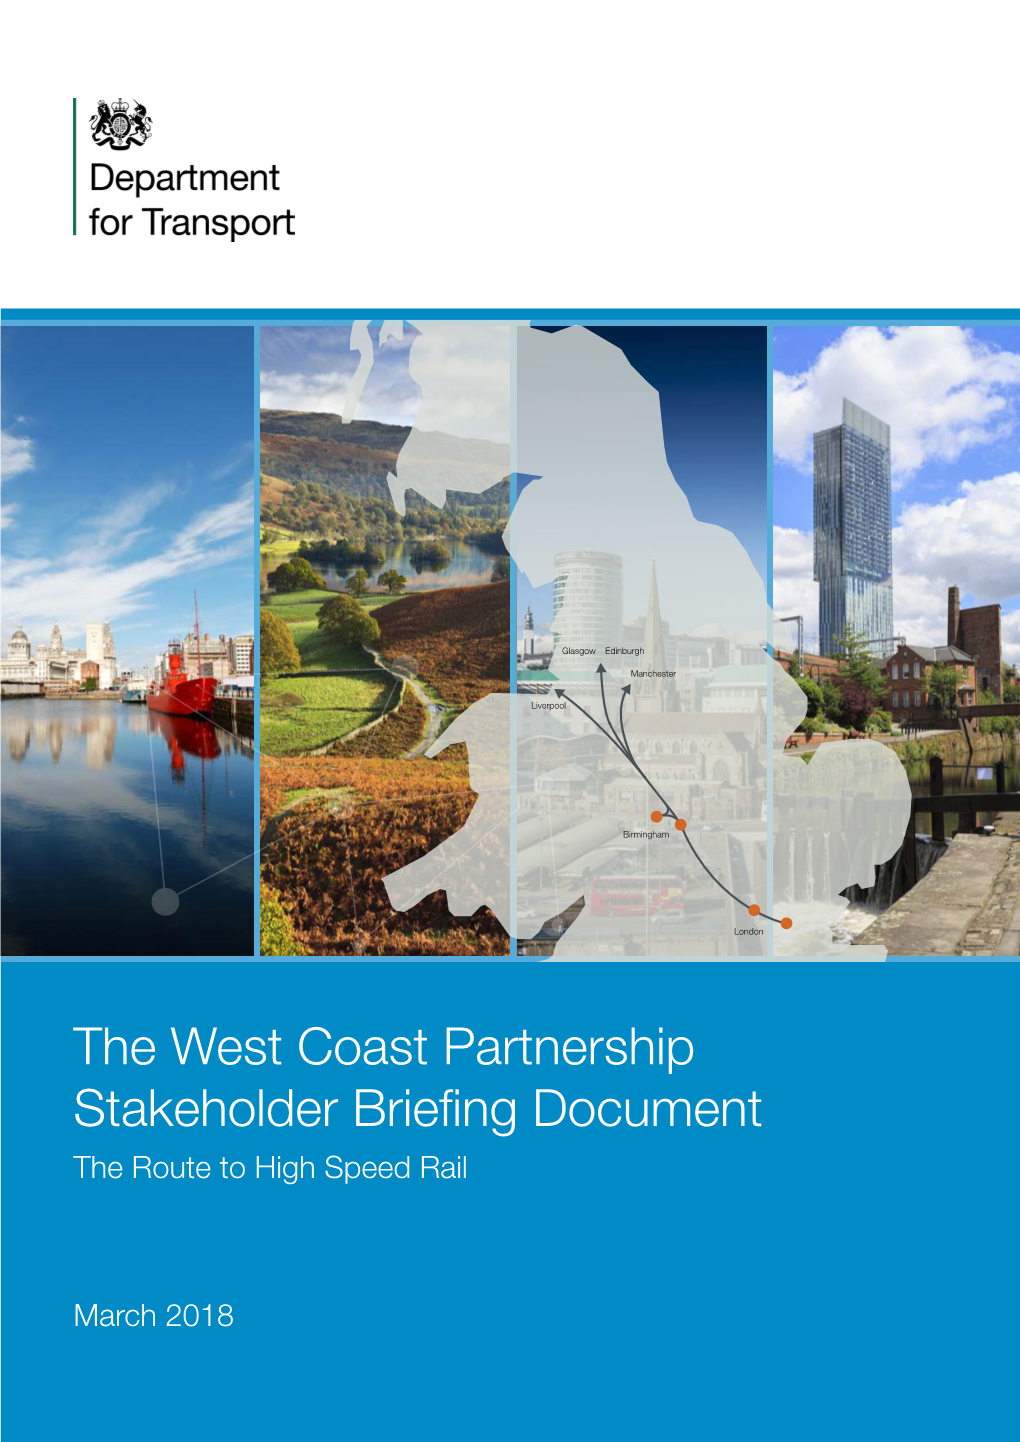 West Coast Partnership Stakeholder Briefing Document the Route to High Speed Rail